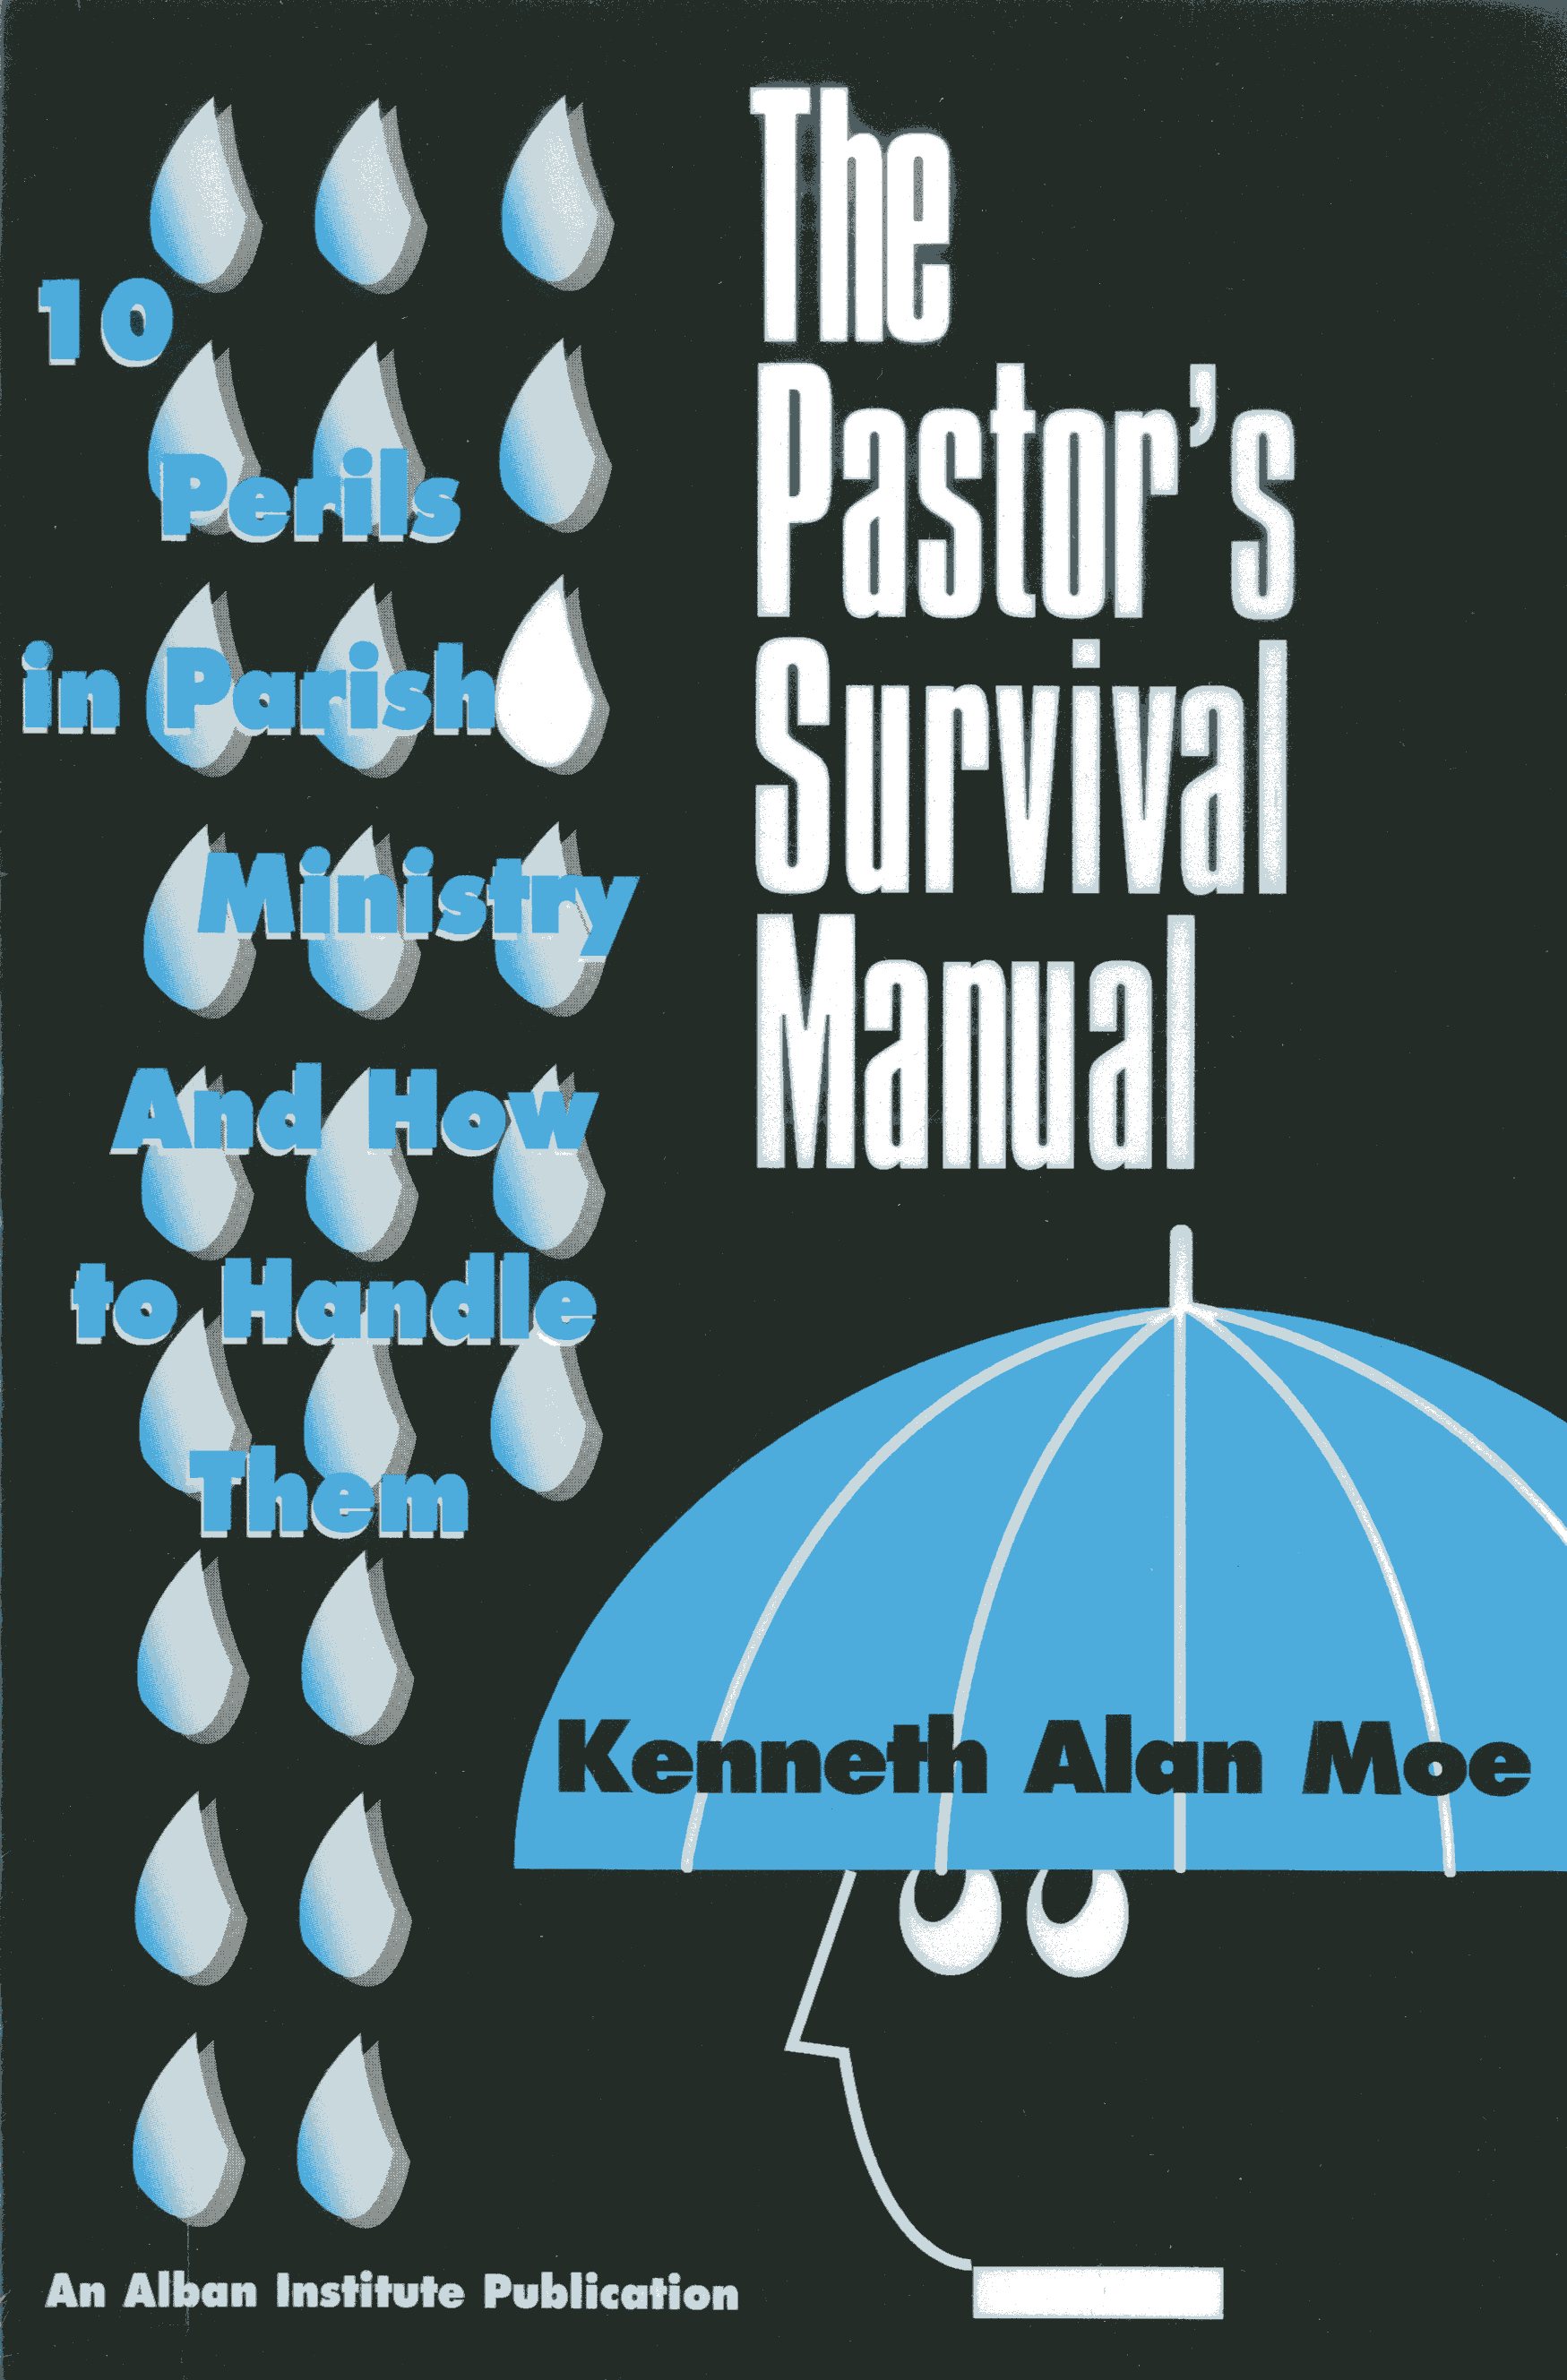 The Pastor's Survival Manual: 10 Perils in Parish Ministry and How to Handle Them